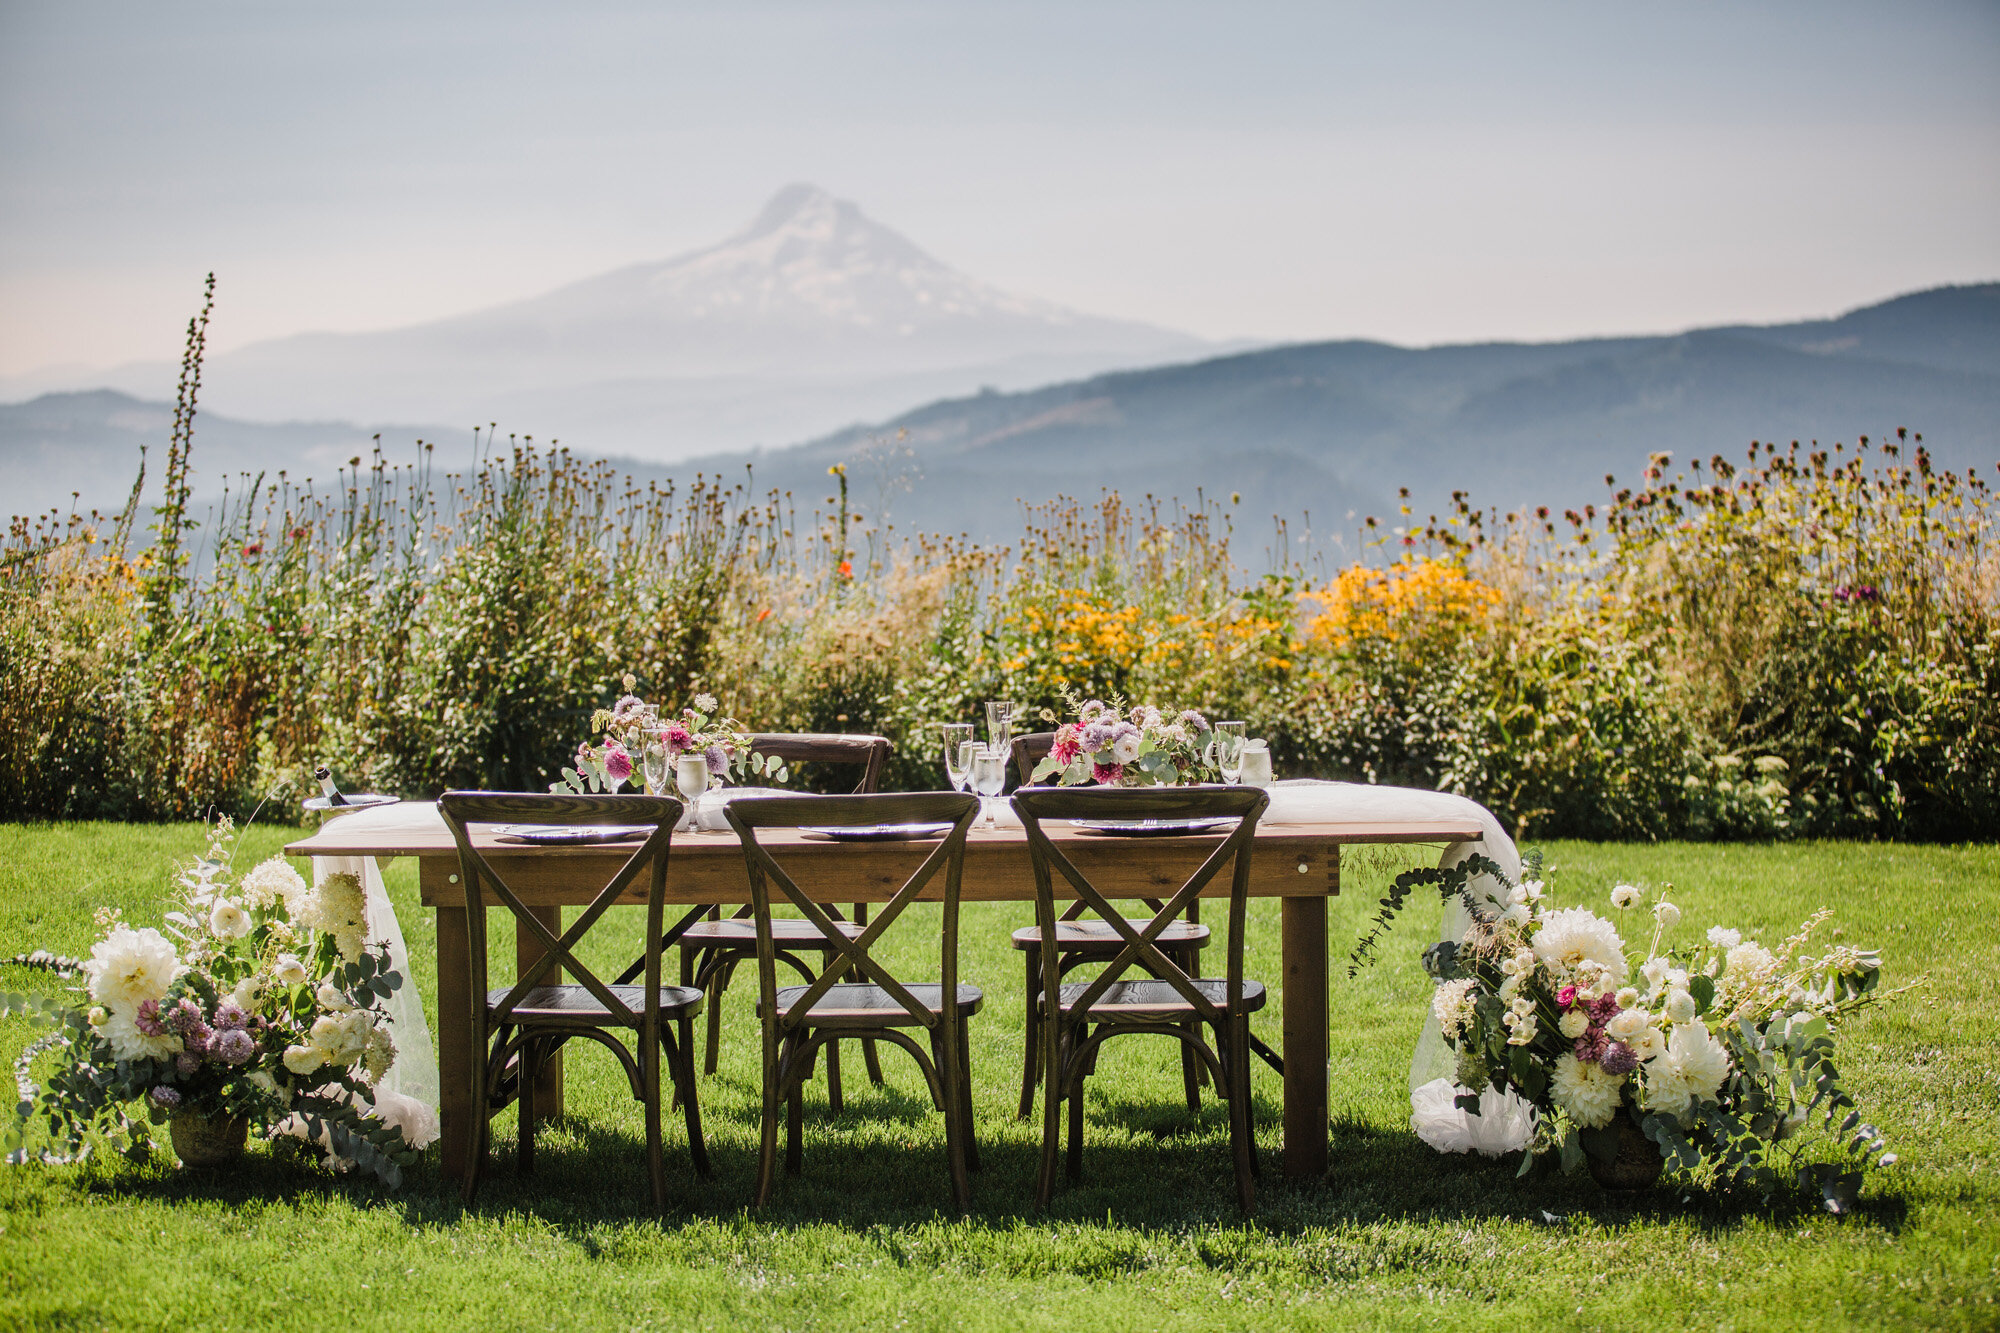 Gorge-Crest-Vineyards-Wedding-Venue-Outlive-Creative-luxe-event-productions_03.jpg